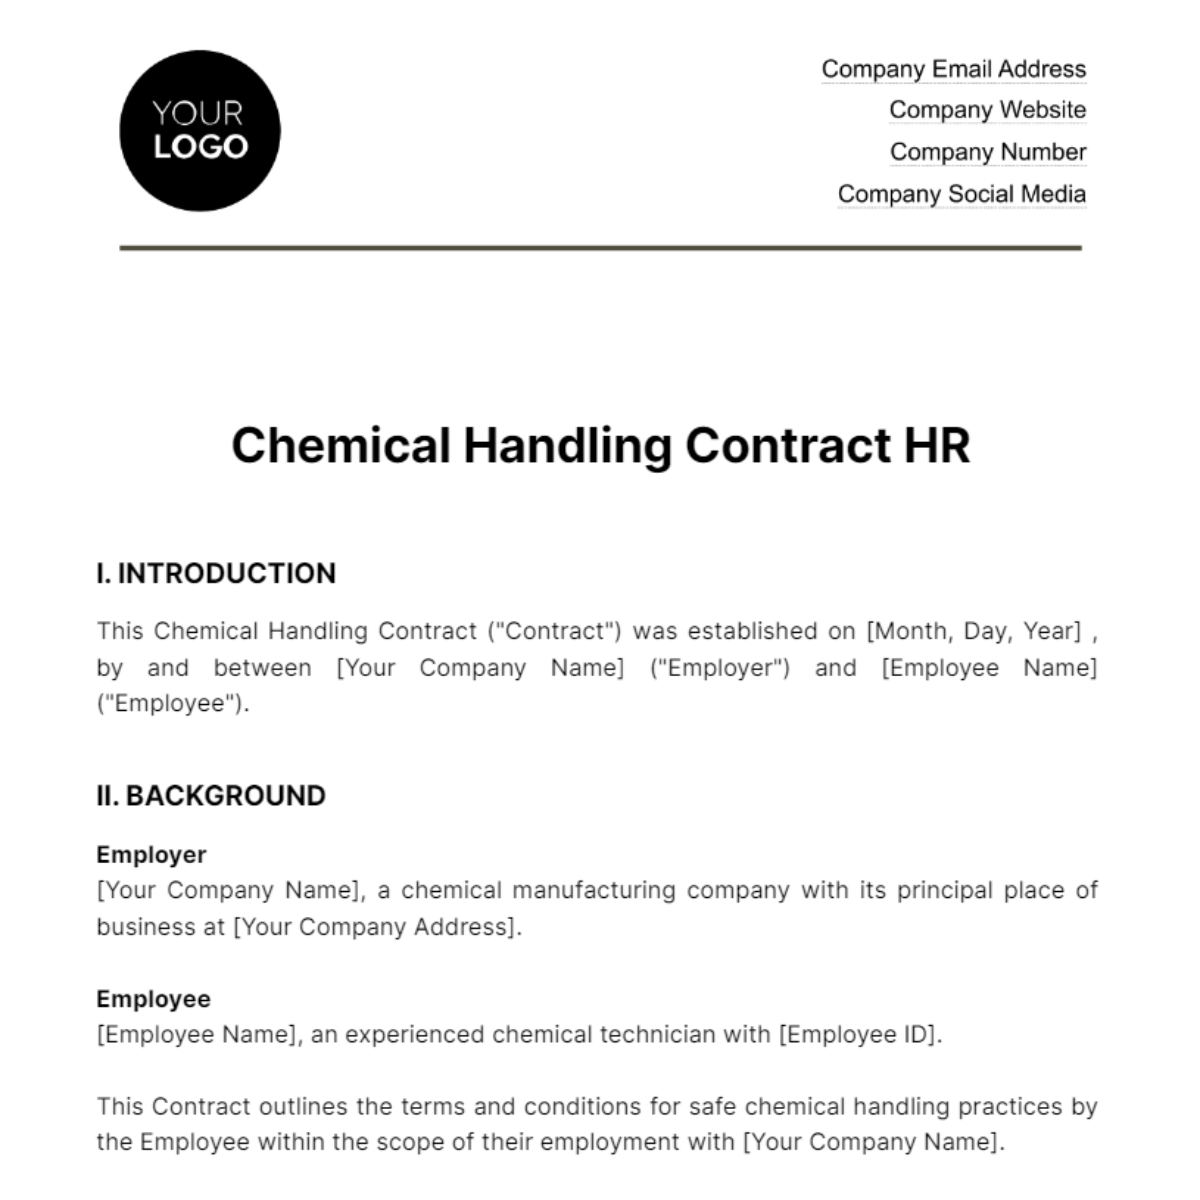 Chemical Handling Contract HR Template